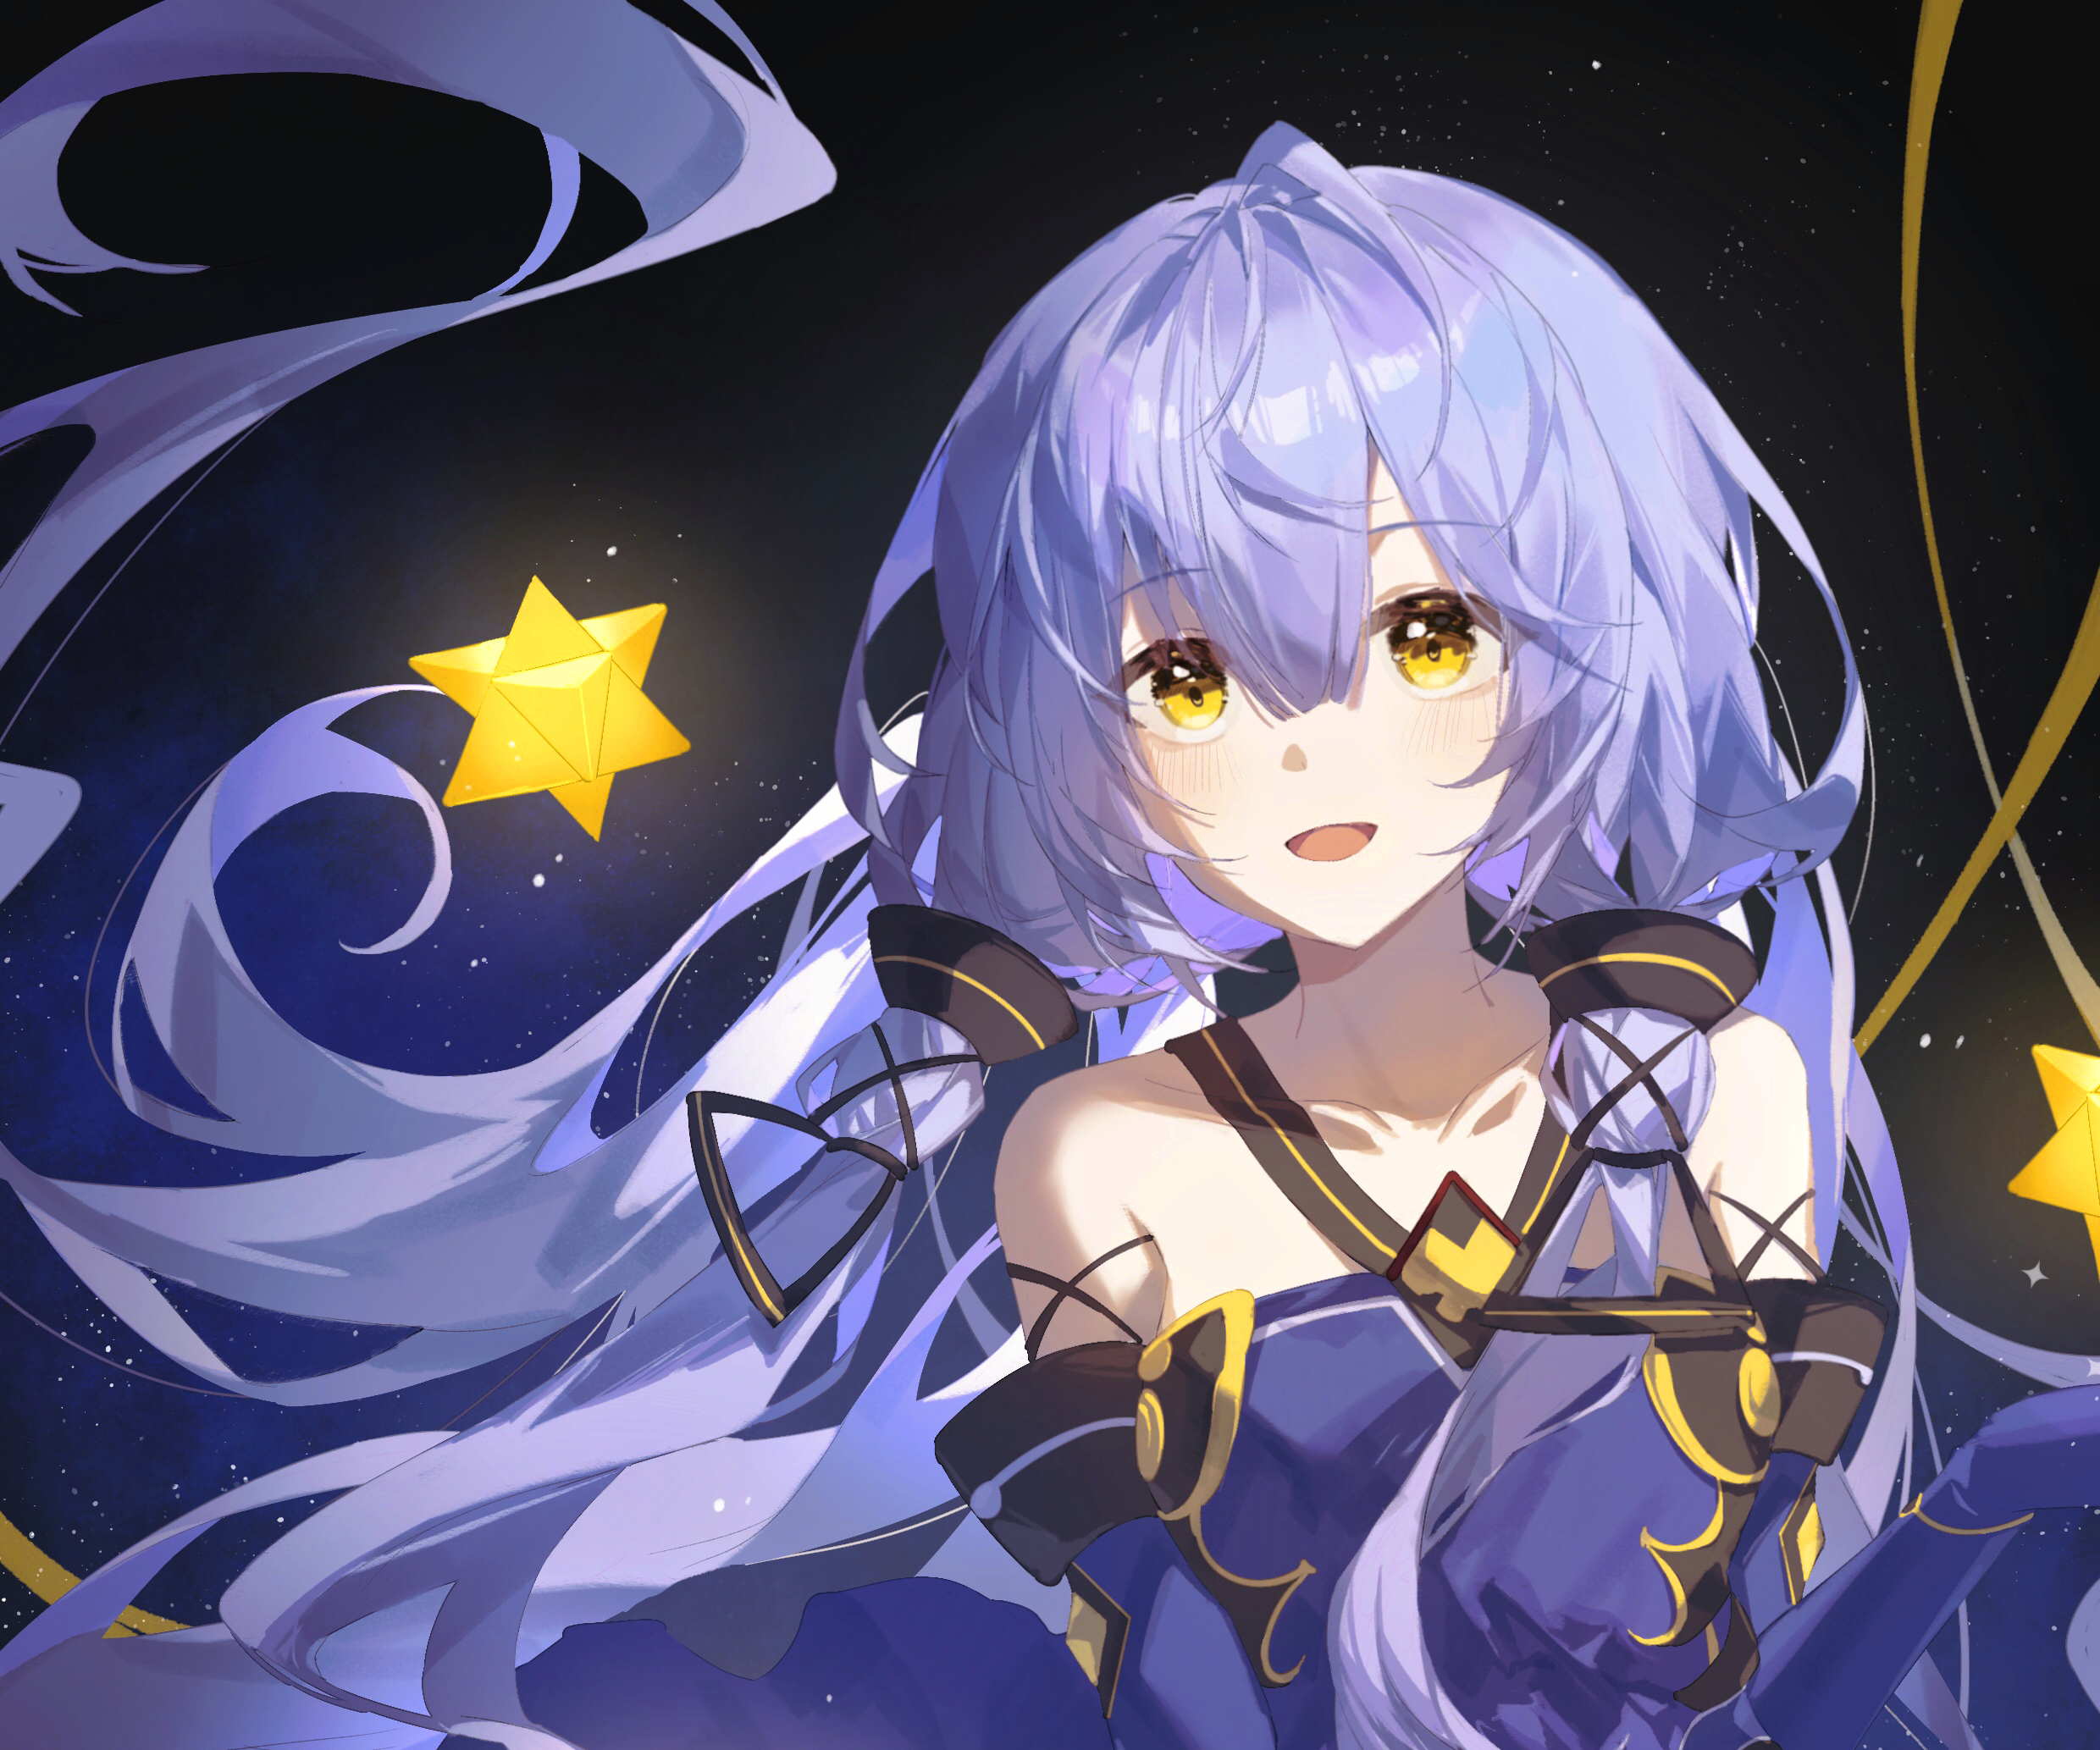 Stardust (Vocaloid)» 1080P, 2k, 4k HD wallpapers, backgrounds free download  | Rare Gallery